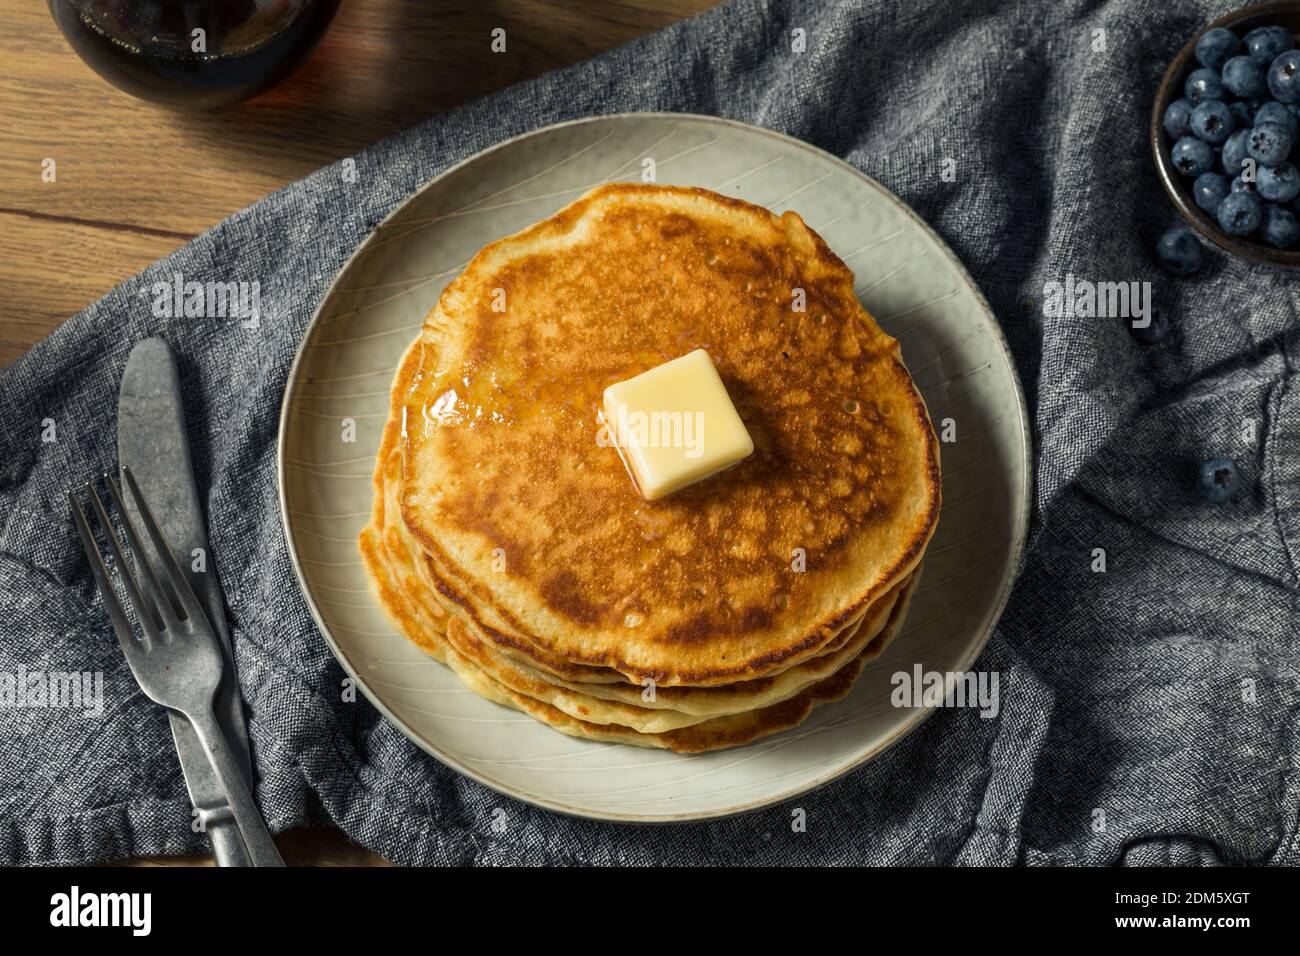 Homemade Sourdough Pancakes with Butter and Blueberries Stock Photo